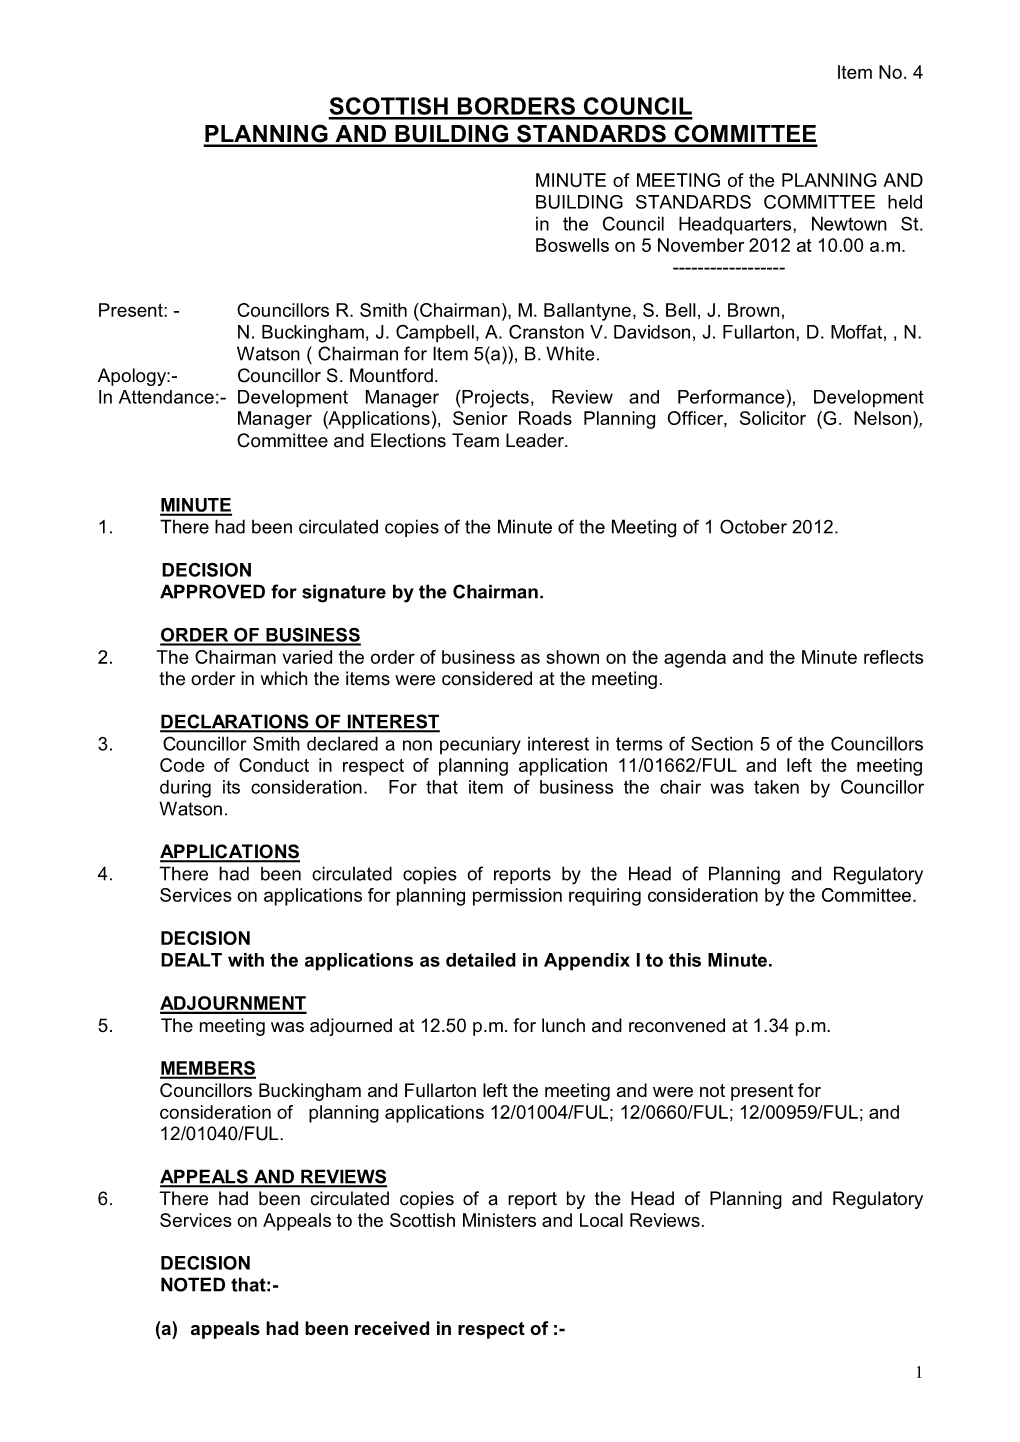 Item No. 4 SCOTTISH BORDERS COUNCIL PLANNING and BUILDING STANDARDS COMMITTEE